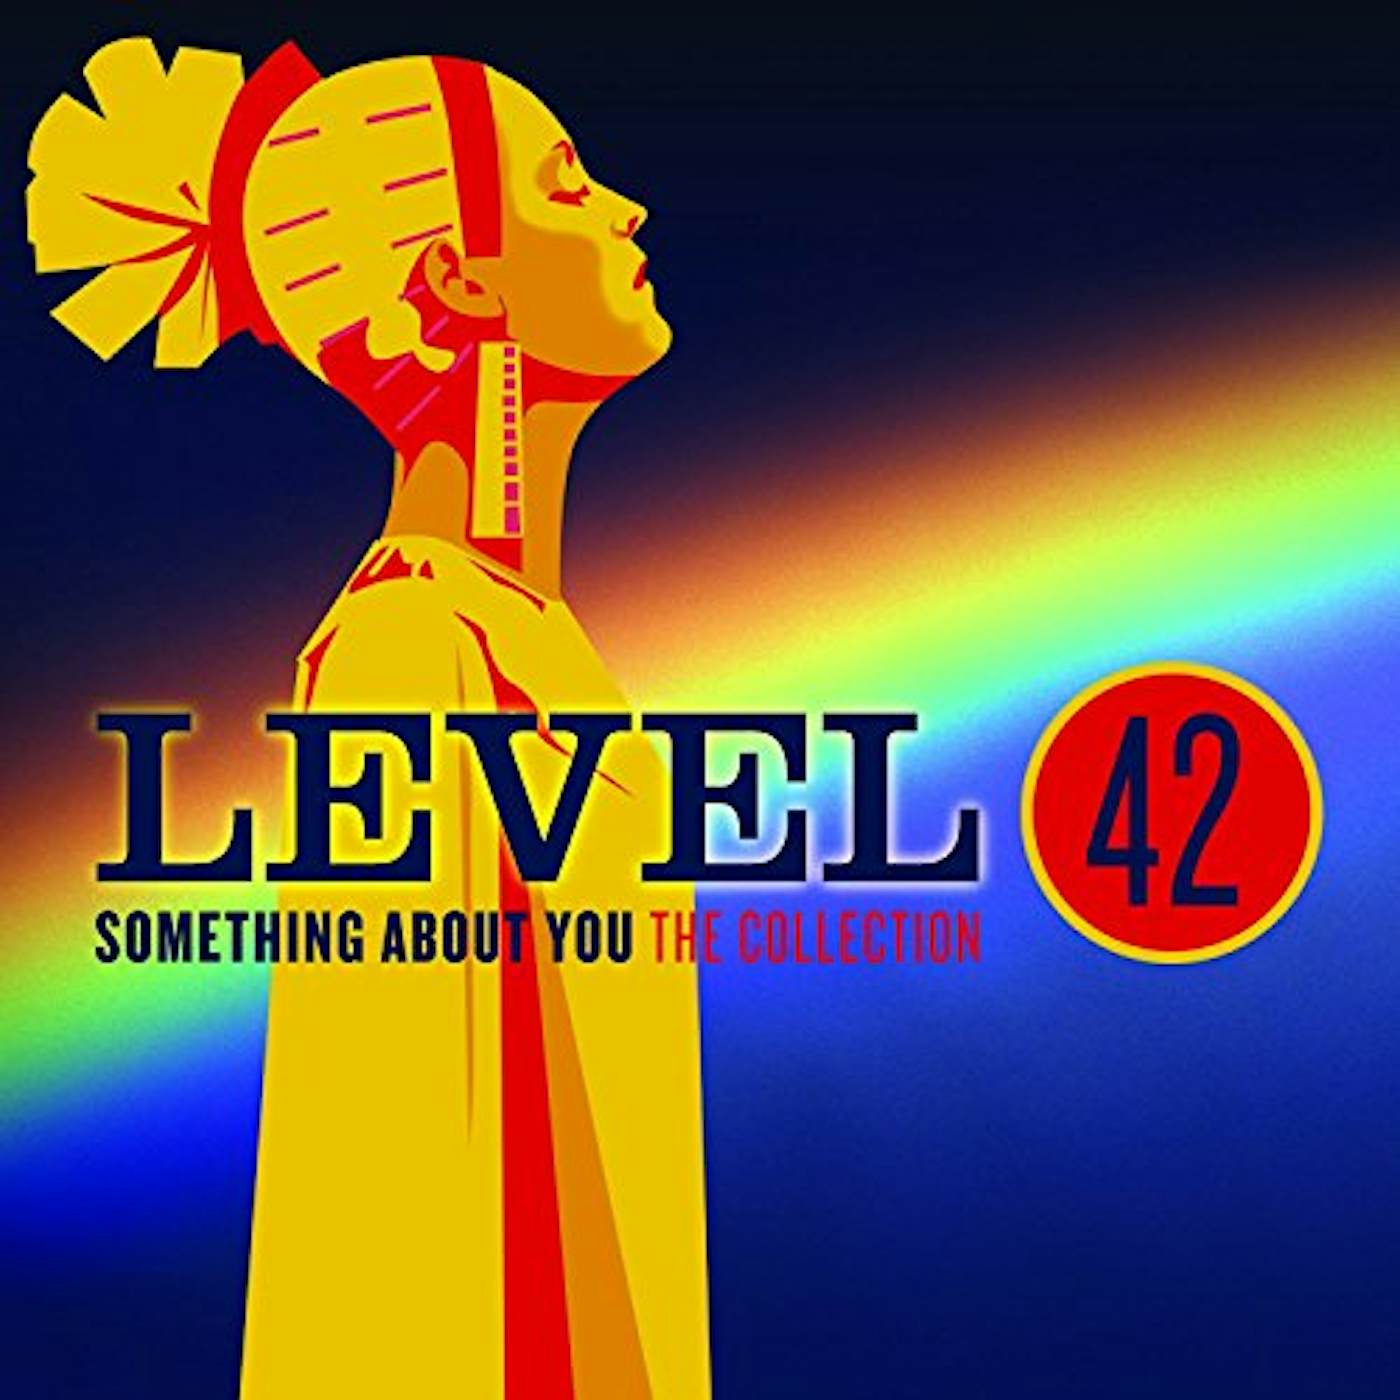 Level 42 SOMETHING ABOUT YOU: THE COLLECTION CD